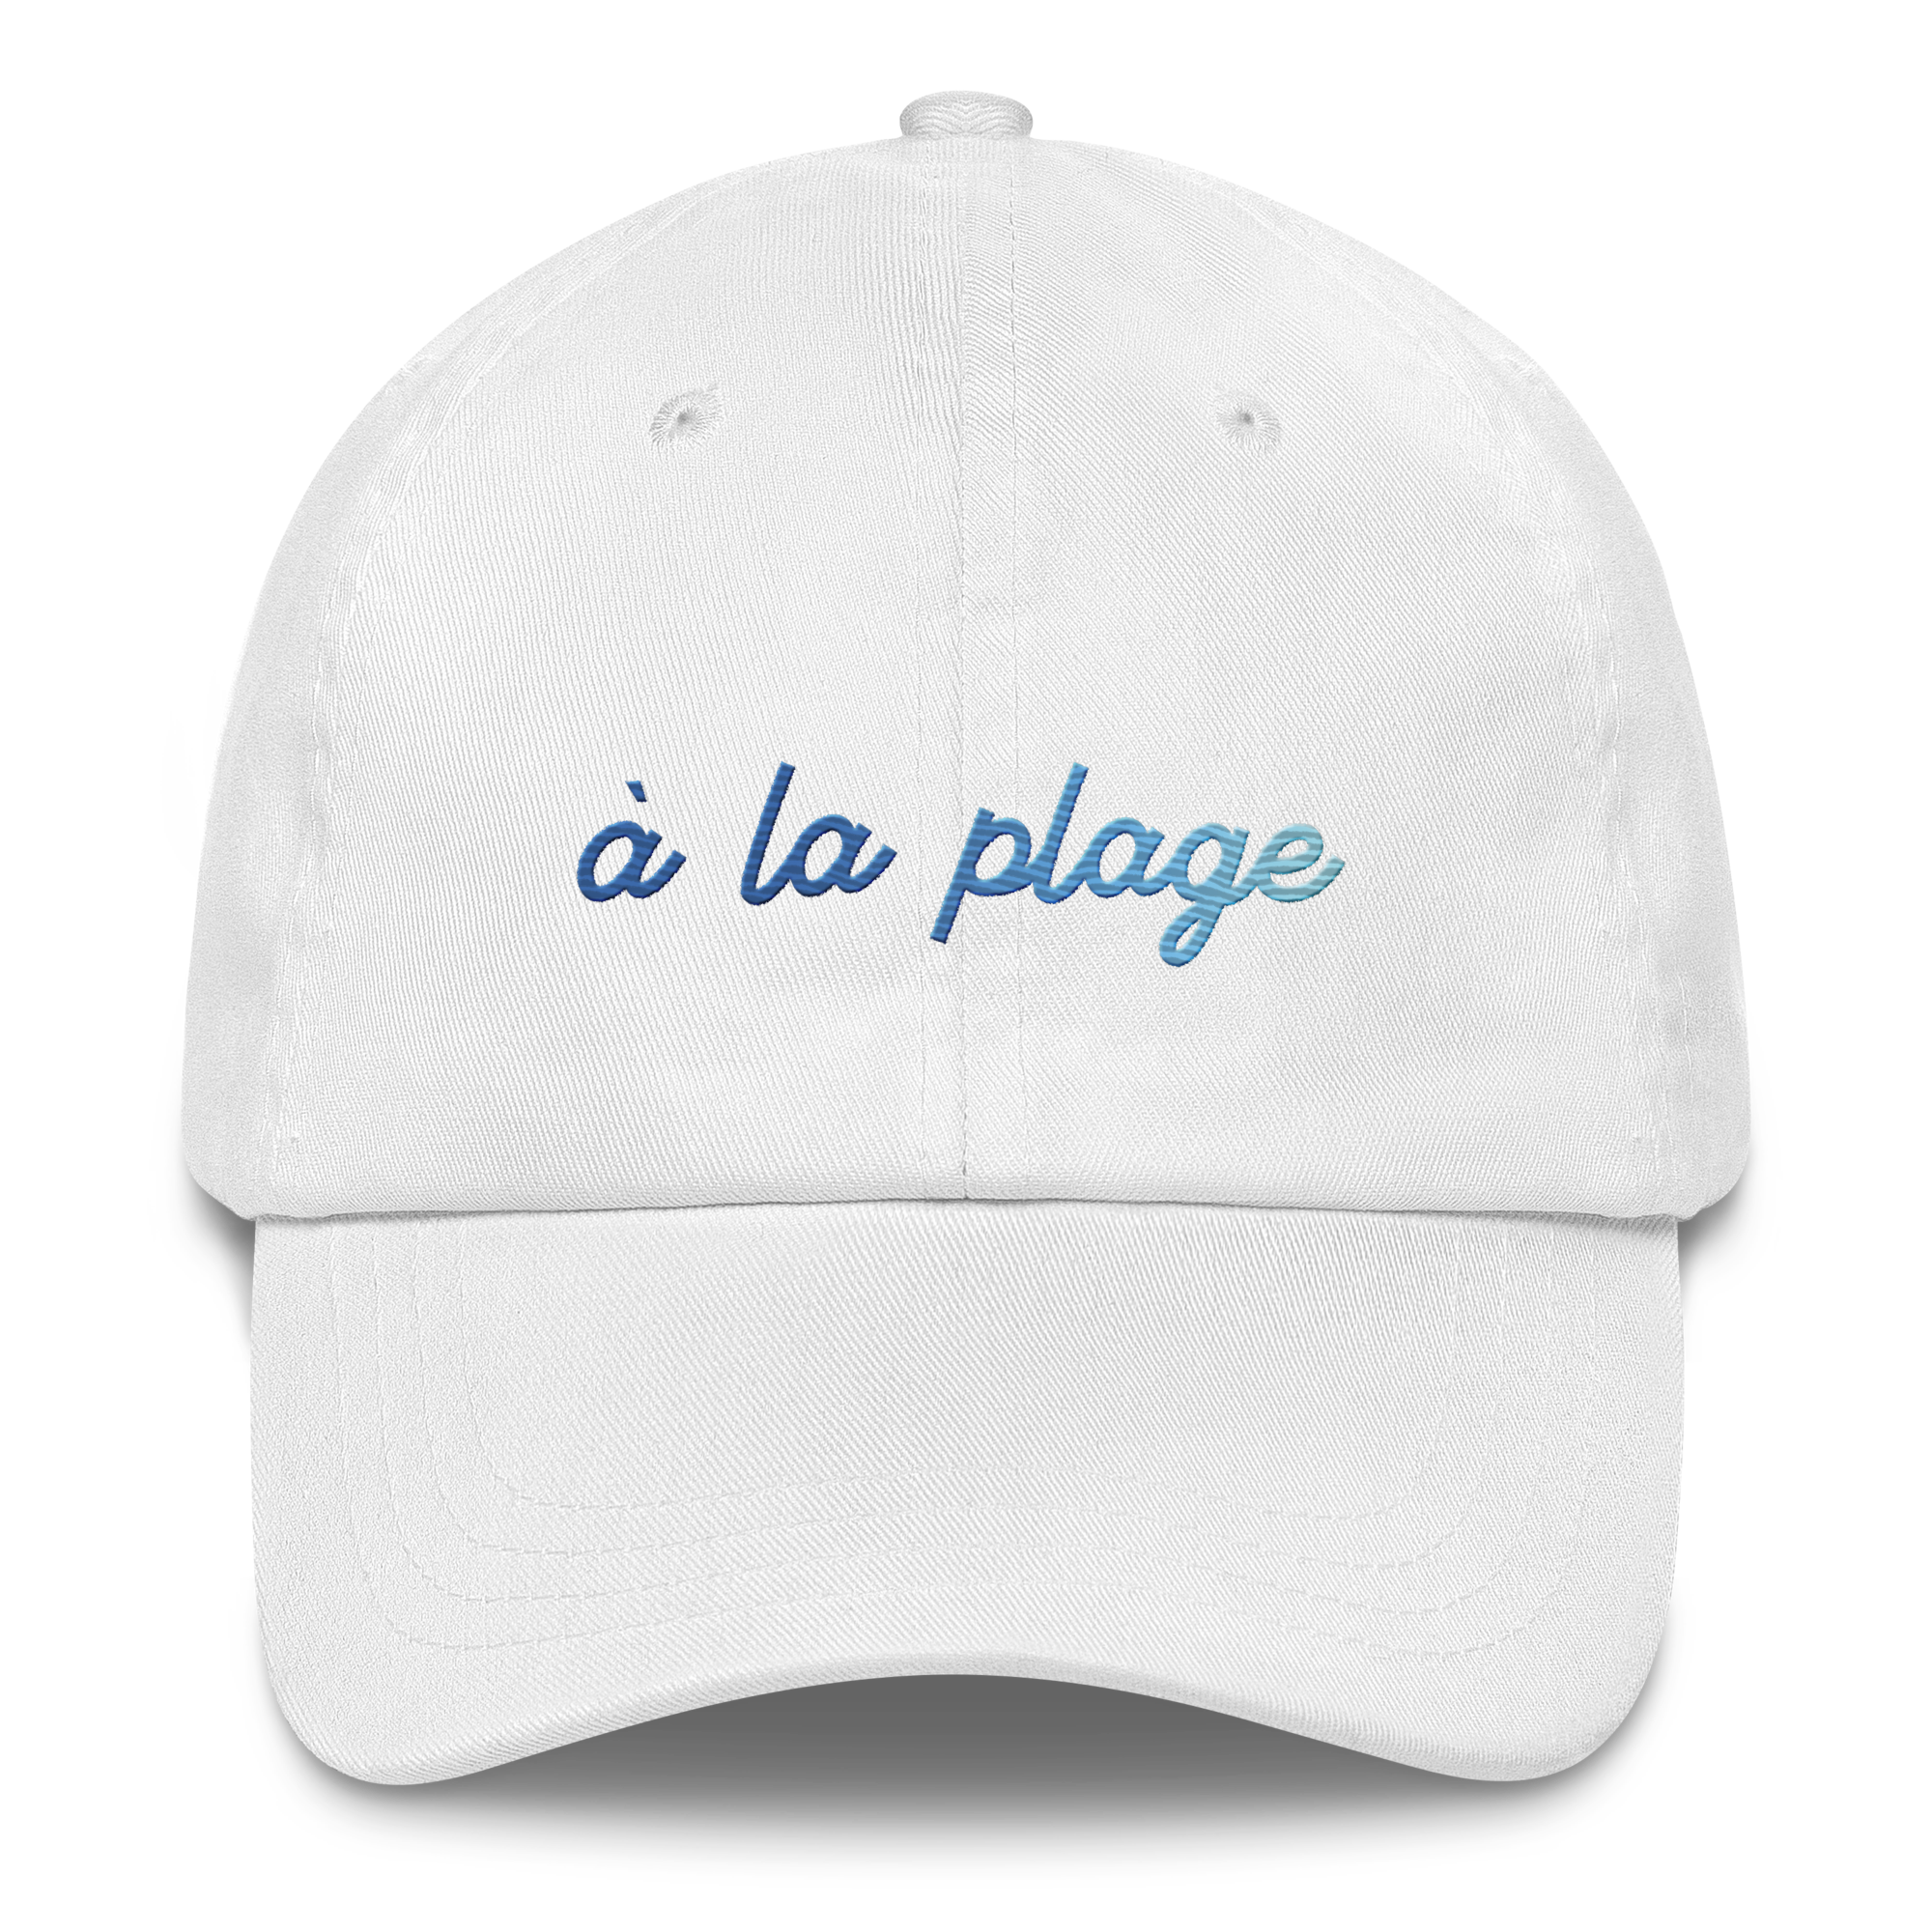 classic-dad-hat-white-front-6671b4bd0c4e3.png